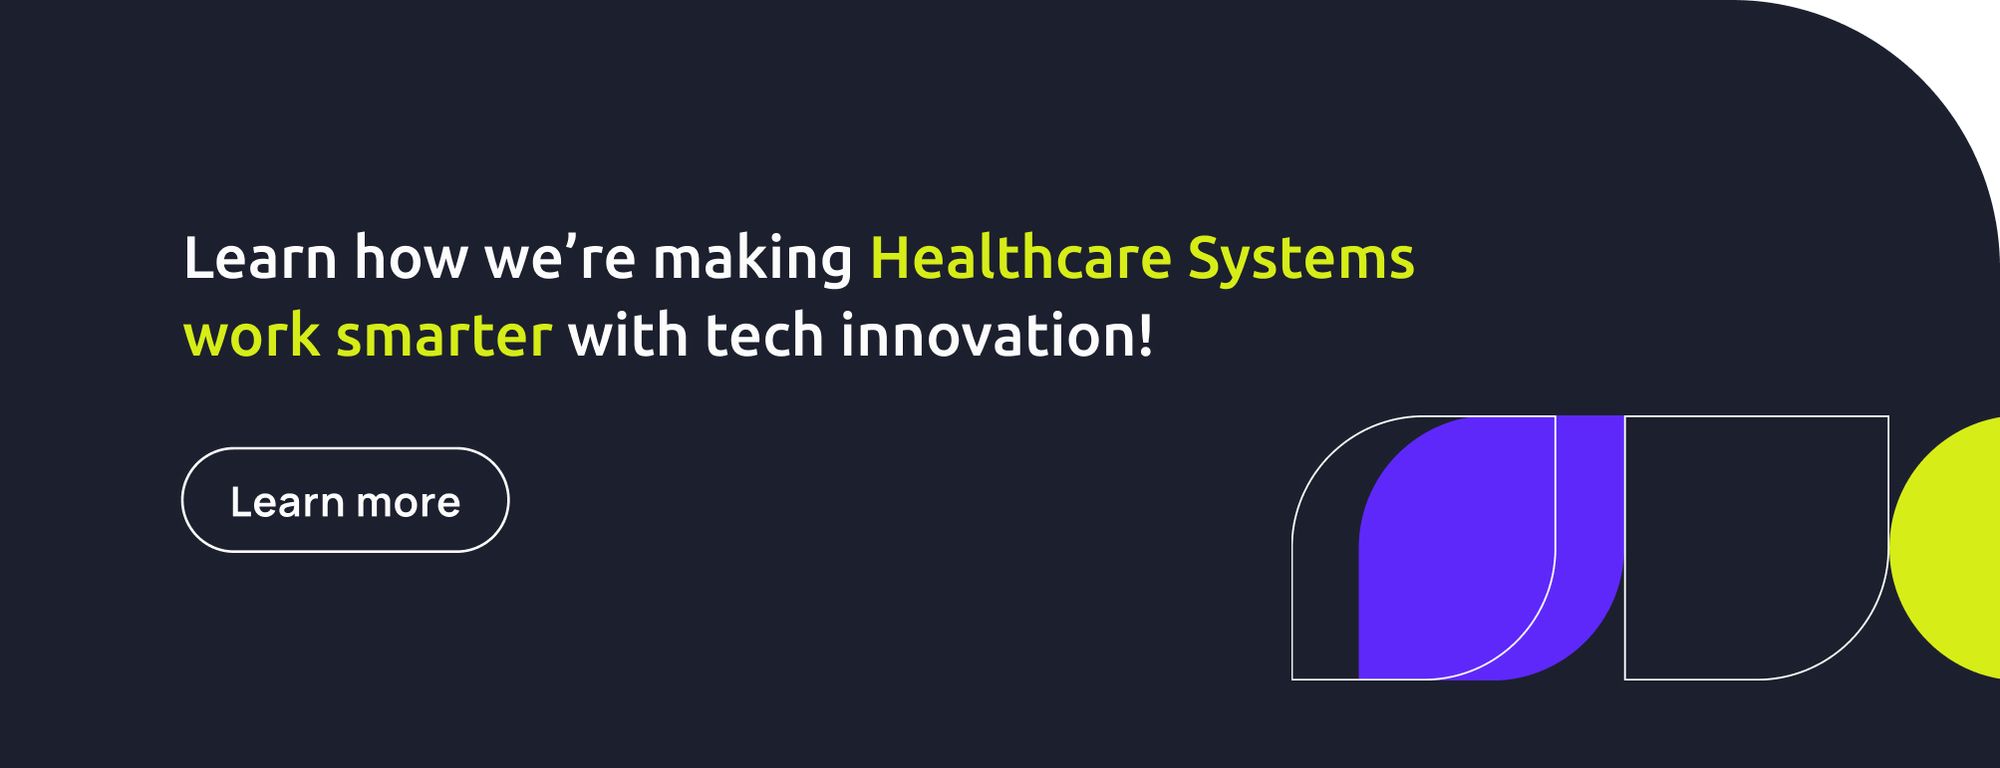 Learn how we're making Healthcare Systems work smarter with tech innovation